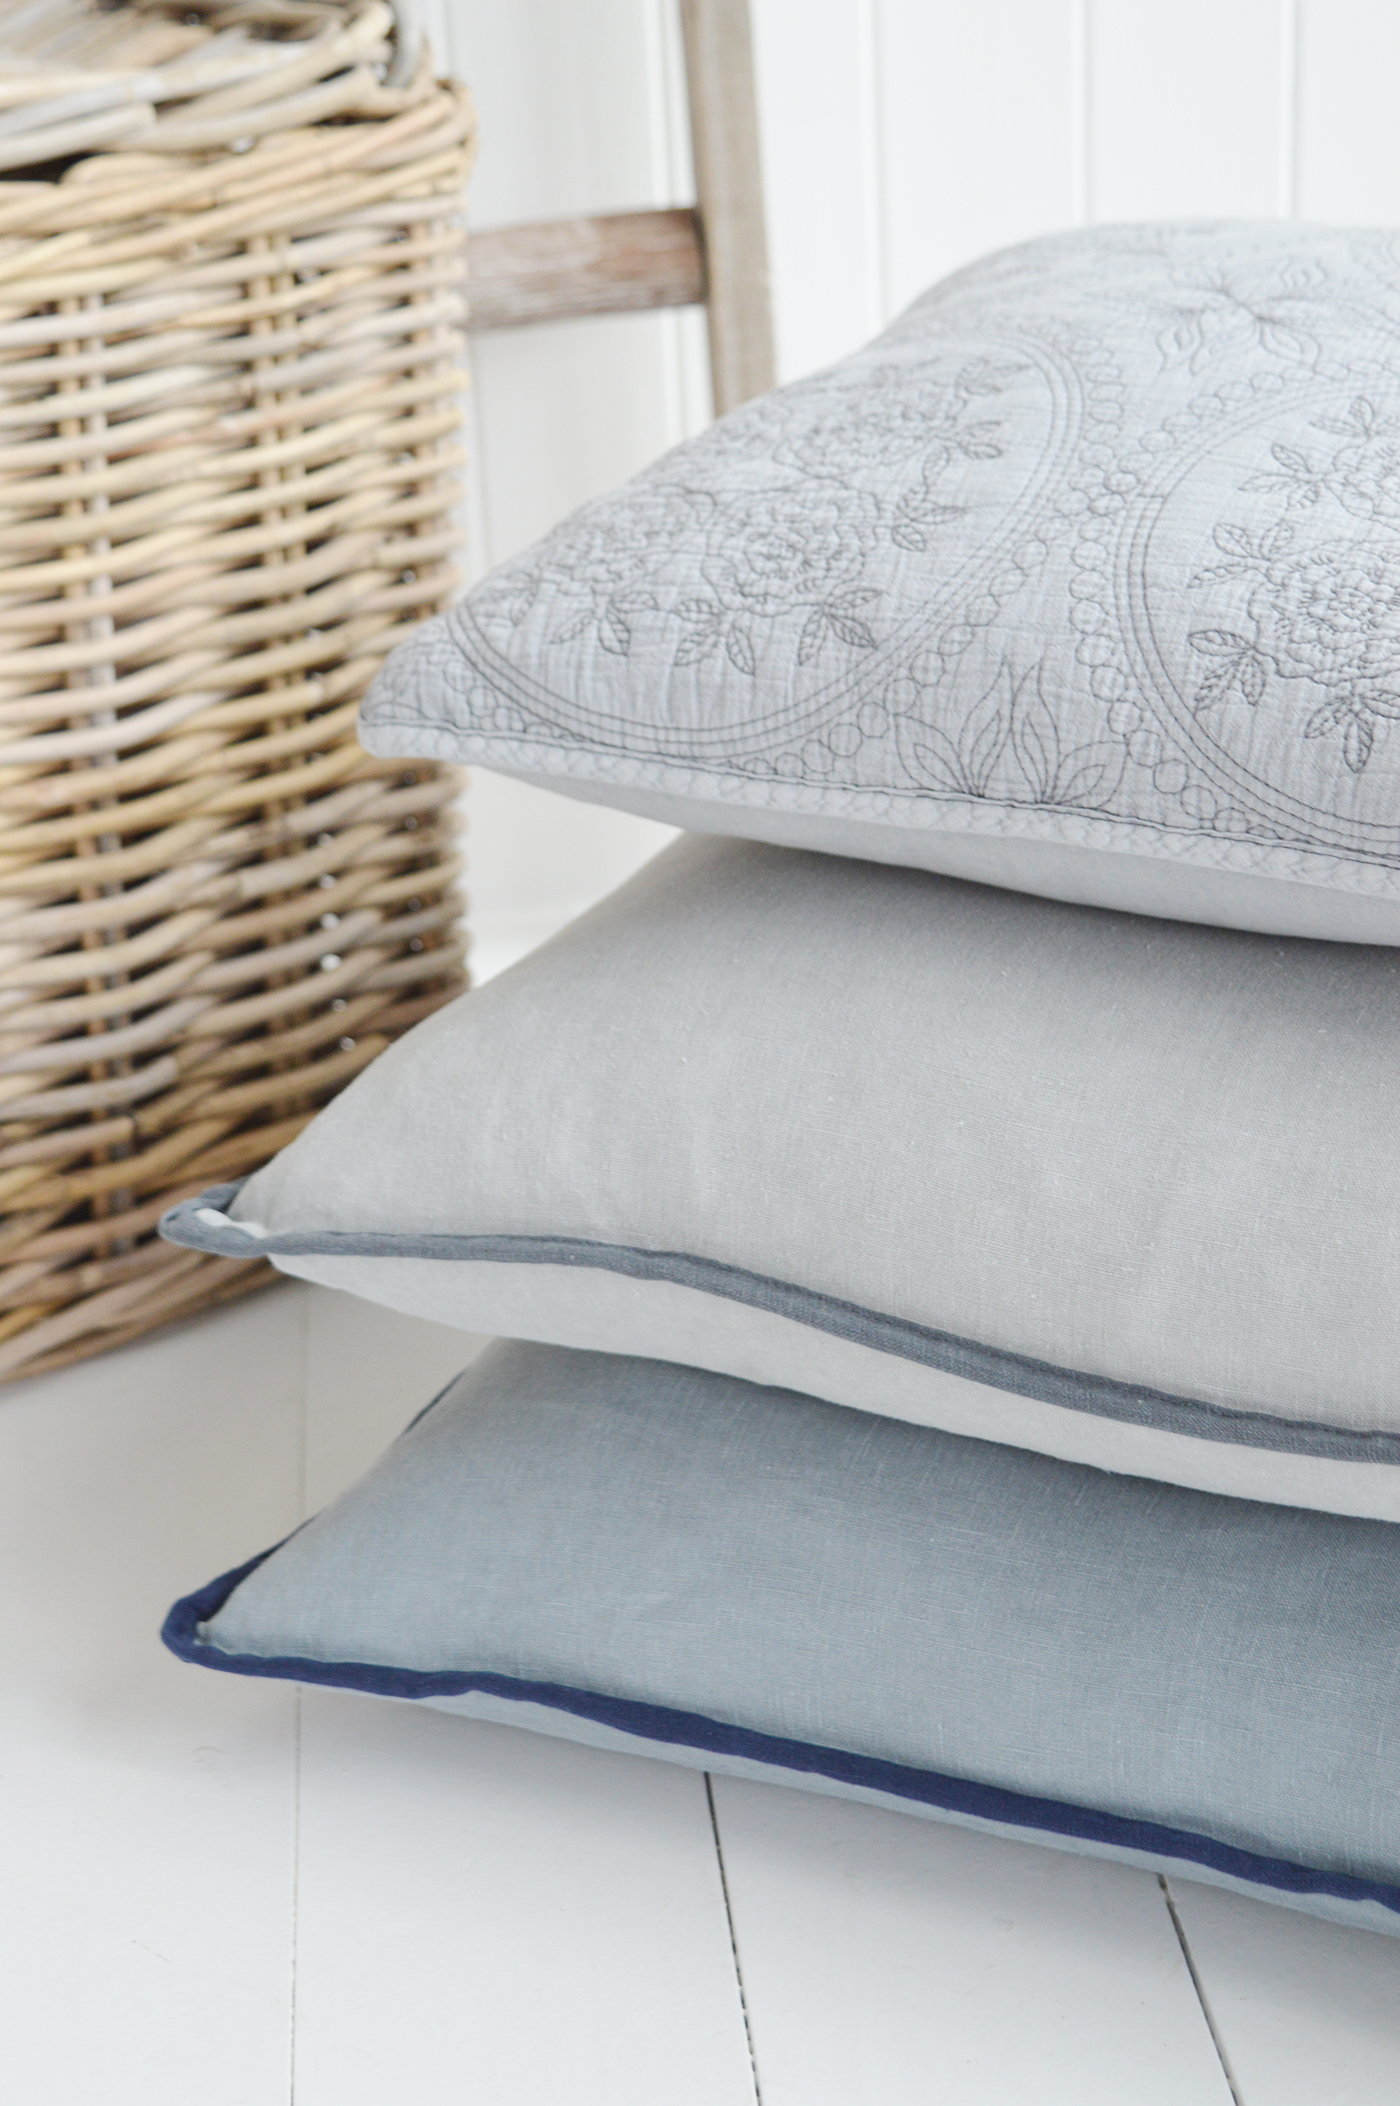 New England Style Cushions for country, coastal, farmhouse and city interiors